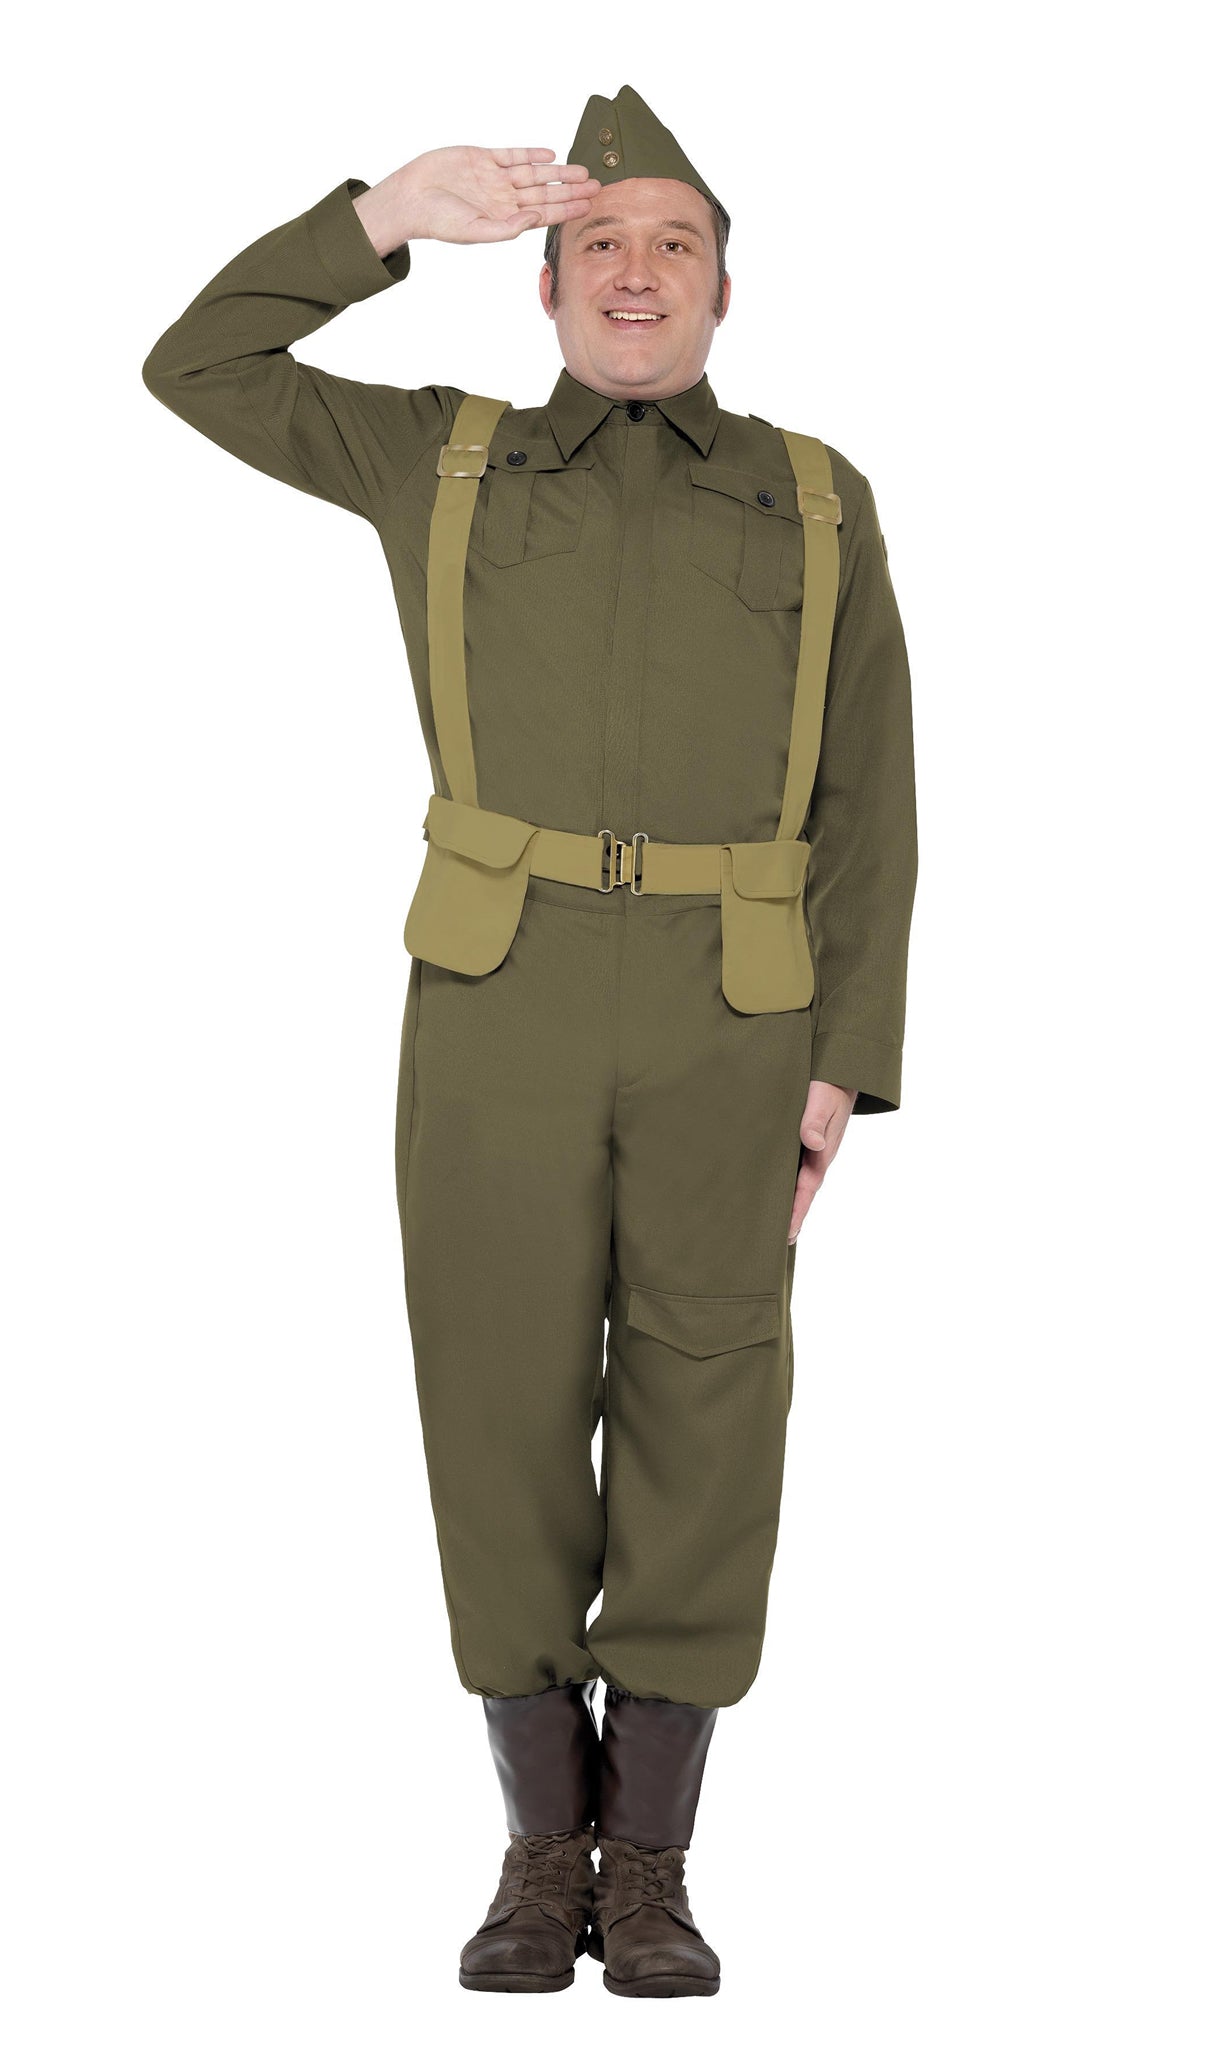 Khaki home guard costume with hat and belt harness